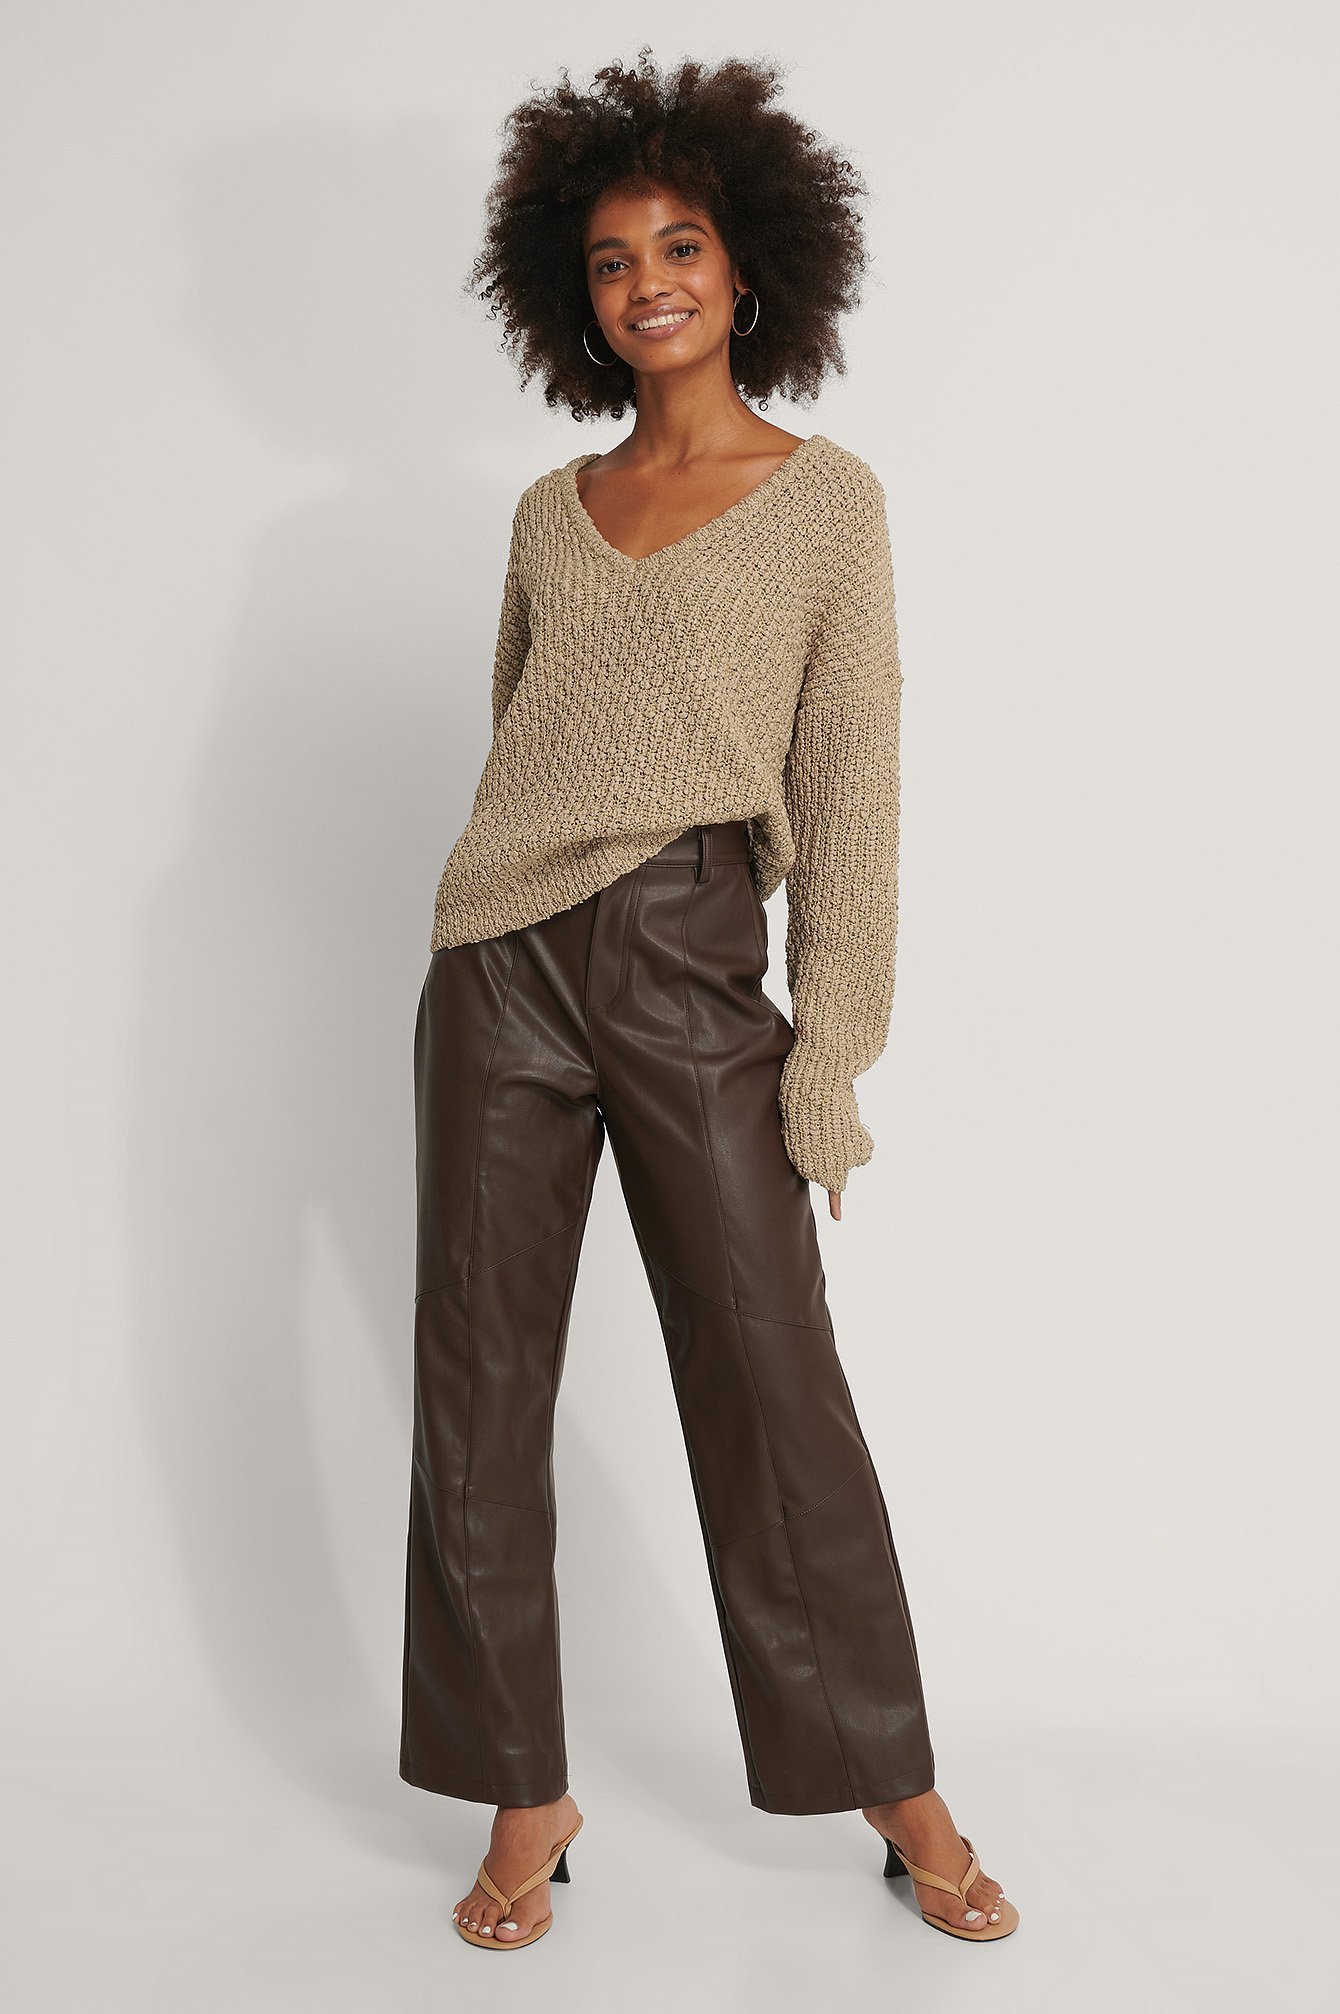 Front V-neck Knitted Sweater Outfit.